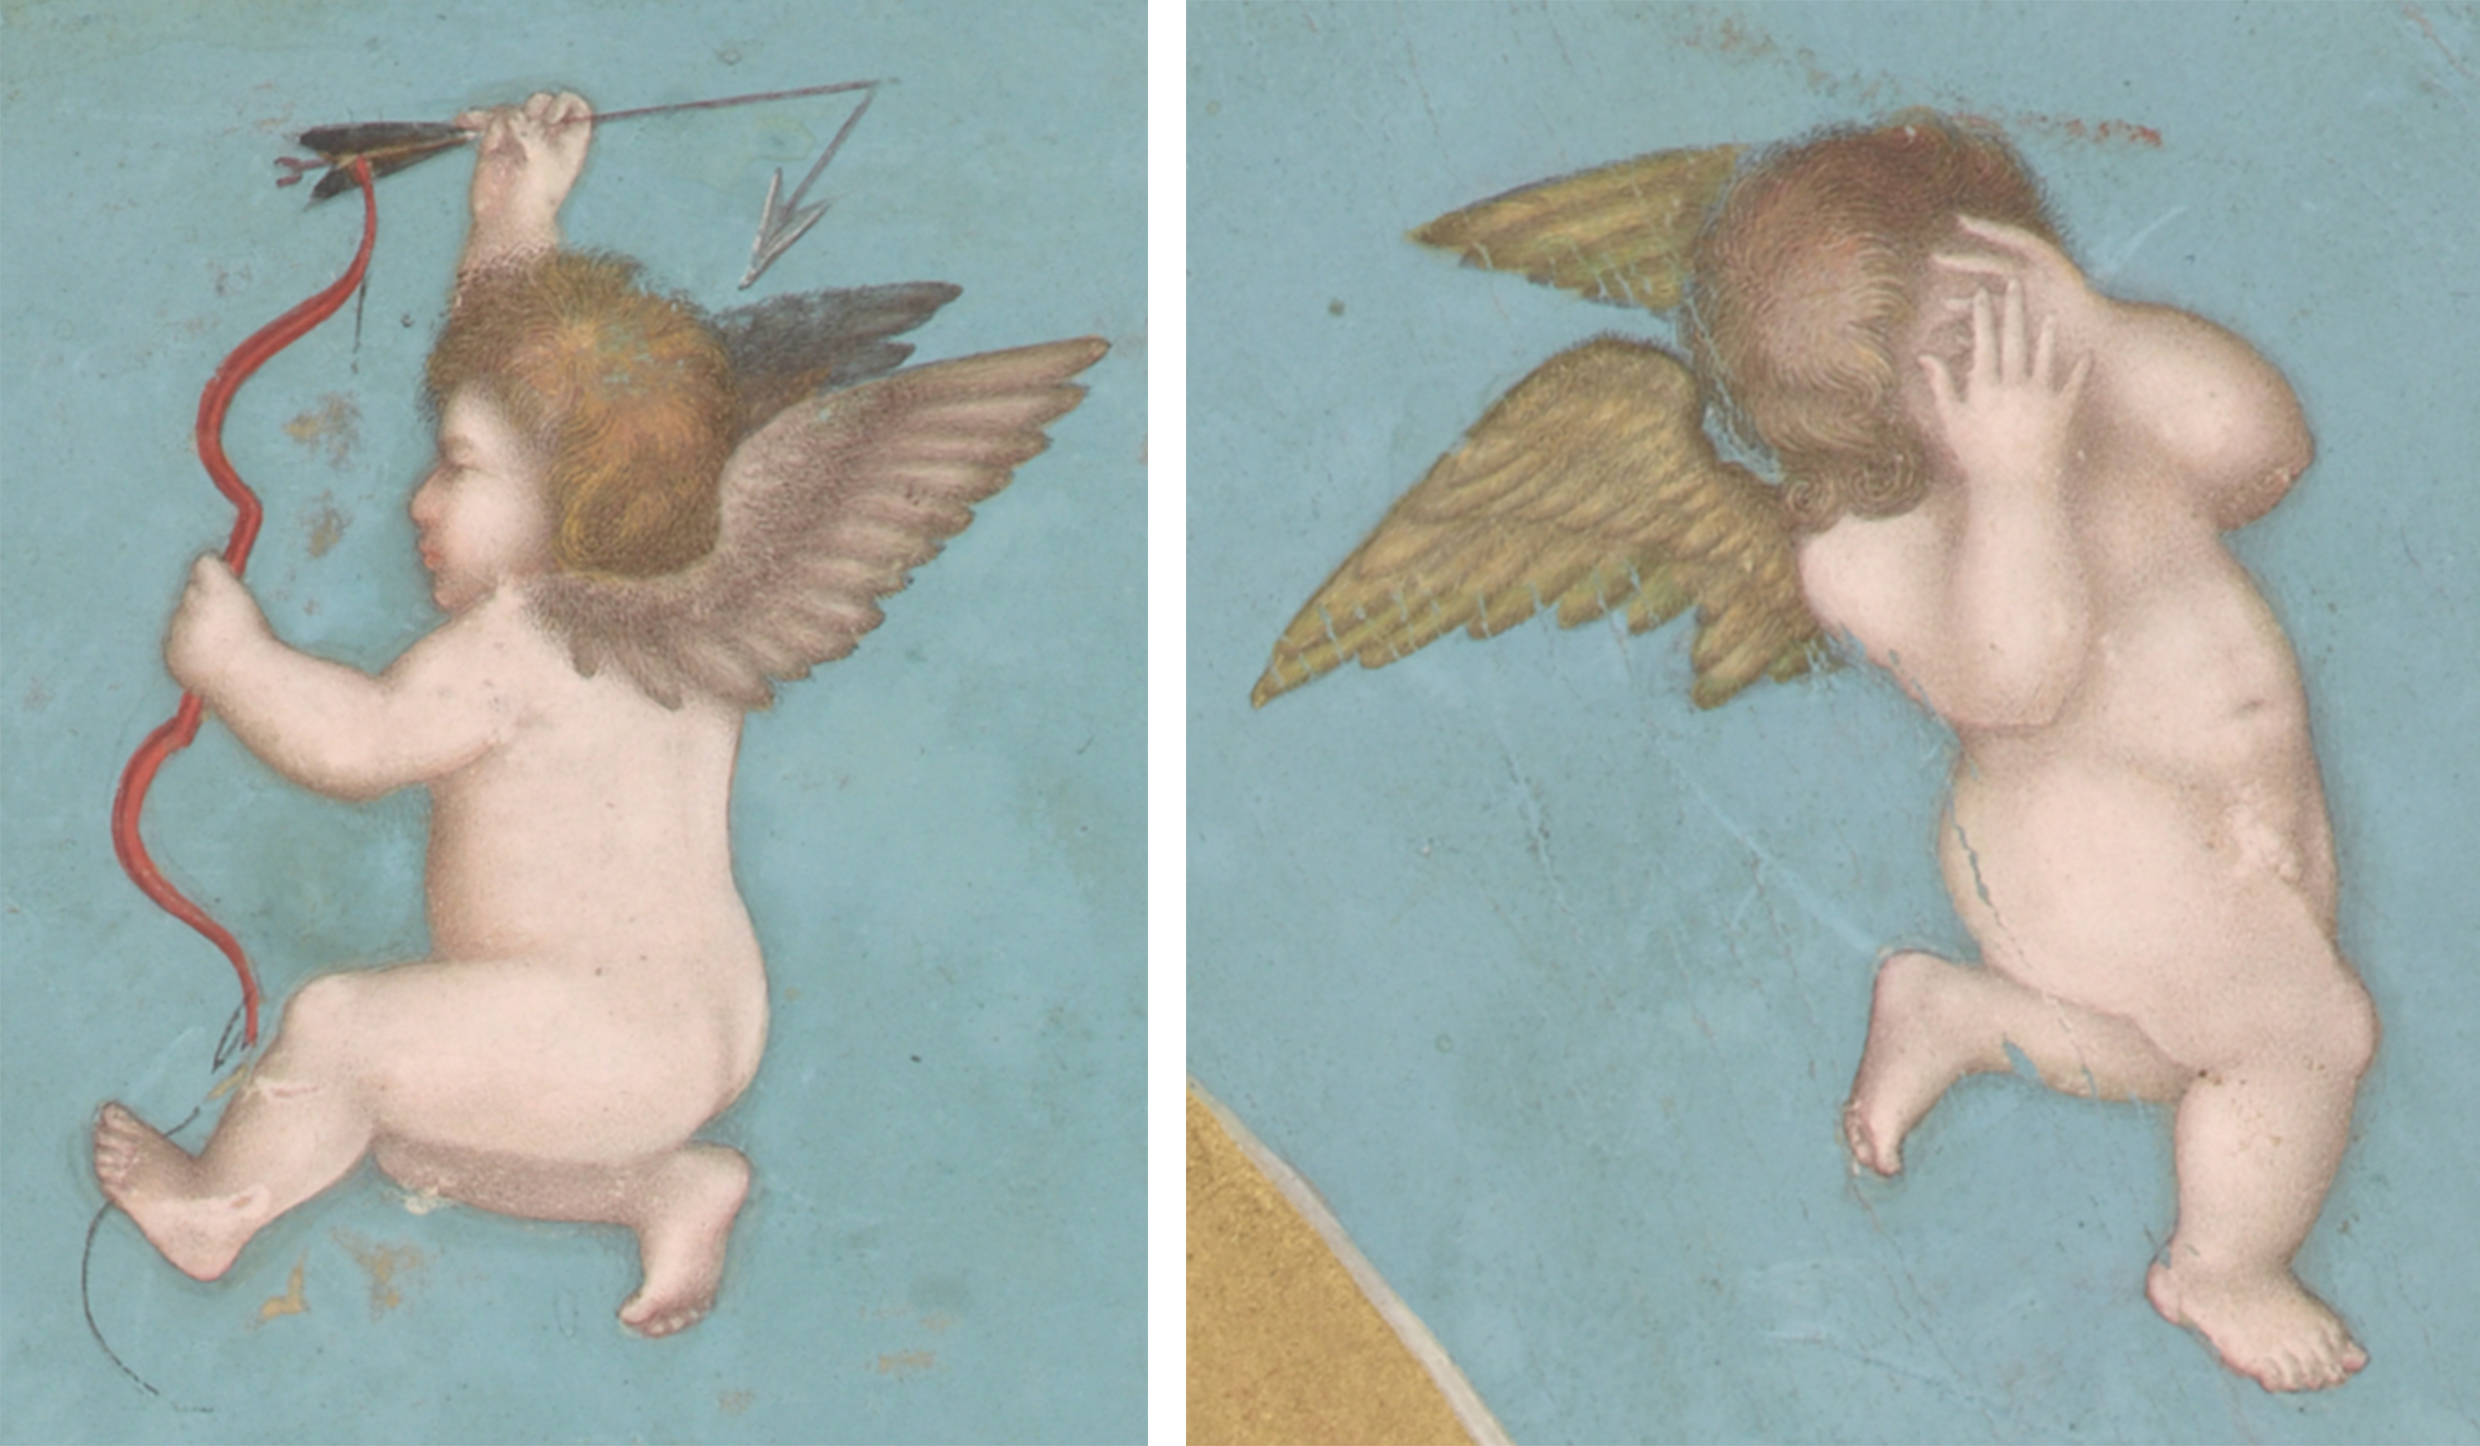 Left: putto with broken arrow (detail); right: putto covering eyes (detail), Bichitr, margins by Muhammad Sadiq, Jahangir Preferring a Sufi Shaikh to Kings from the "St. Petersburg Album," 1615–18, opaque watercolor, gold and ink on paper, 46.9 × 30.7 cm (Freer|Sackler: The Smithsonian's Museums of Asian Art, Washington DC)